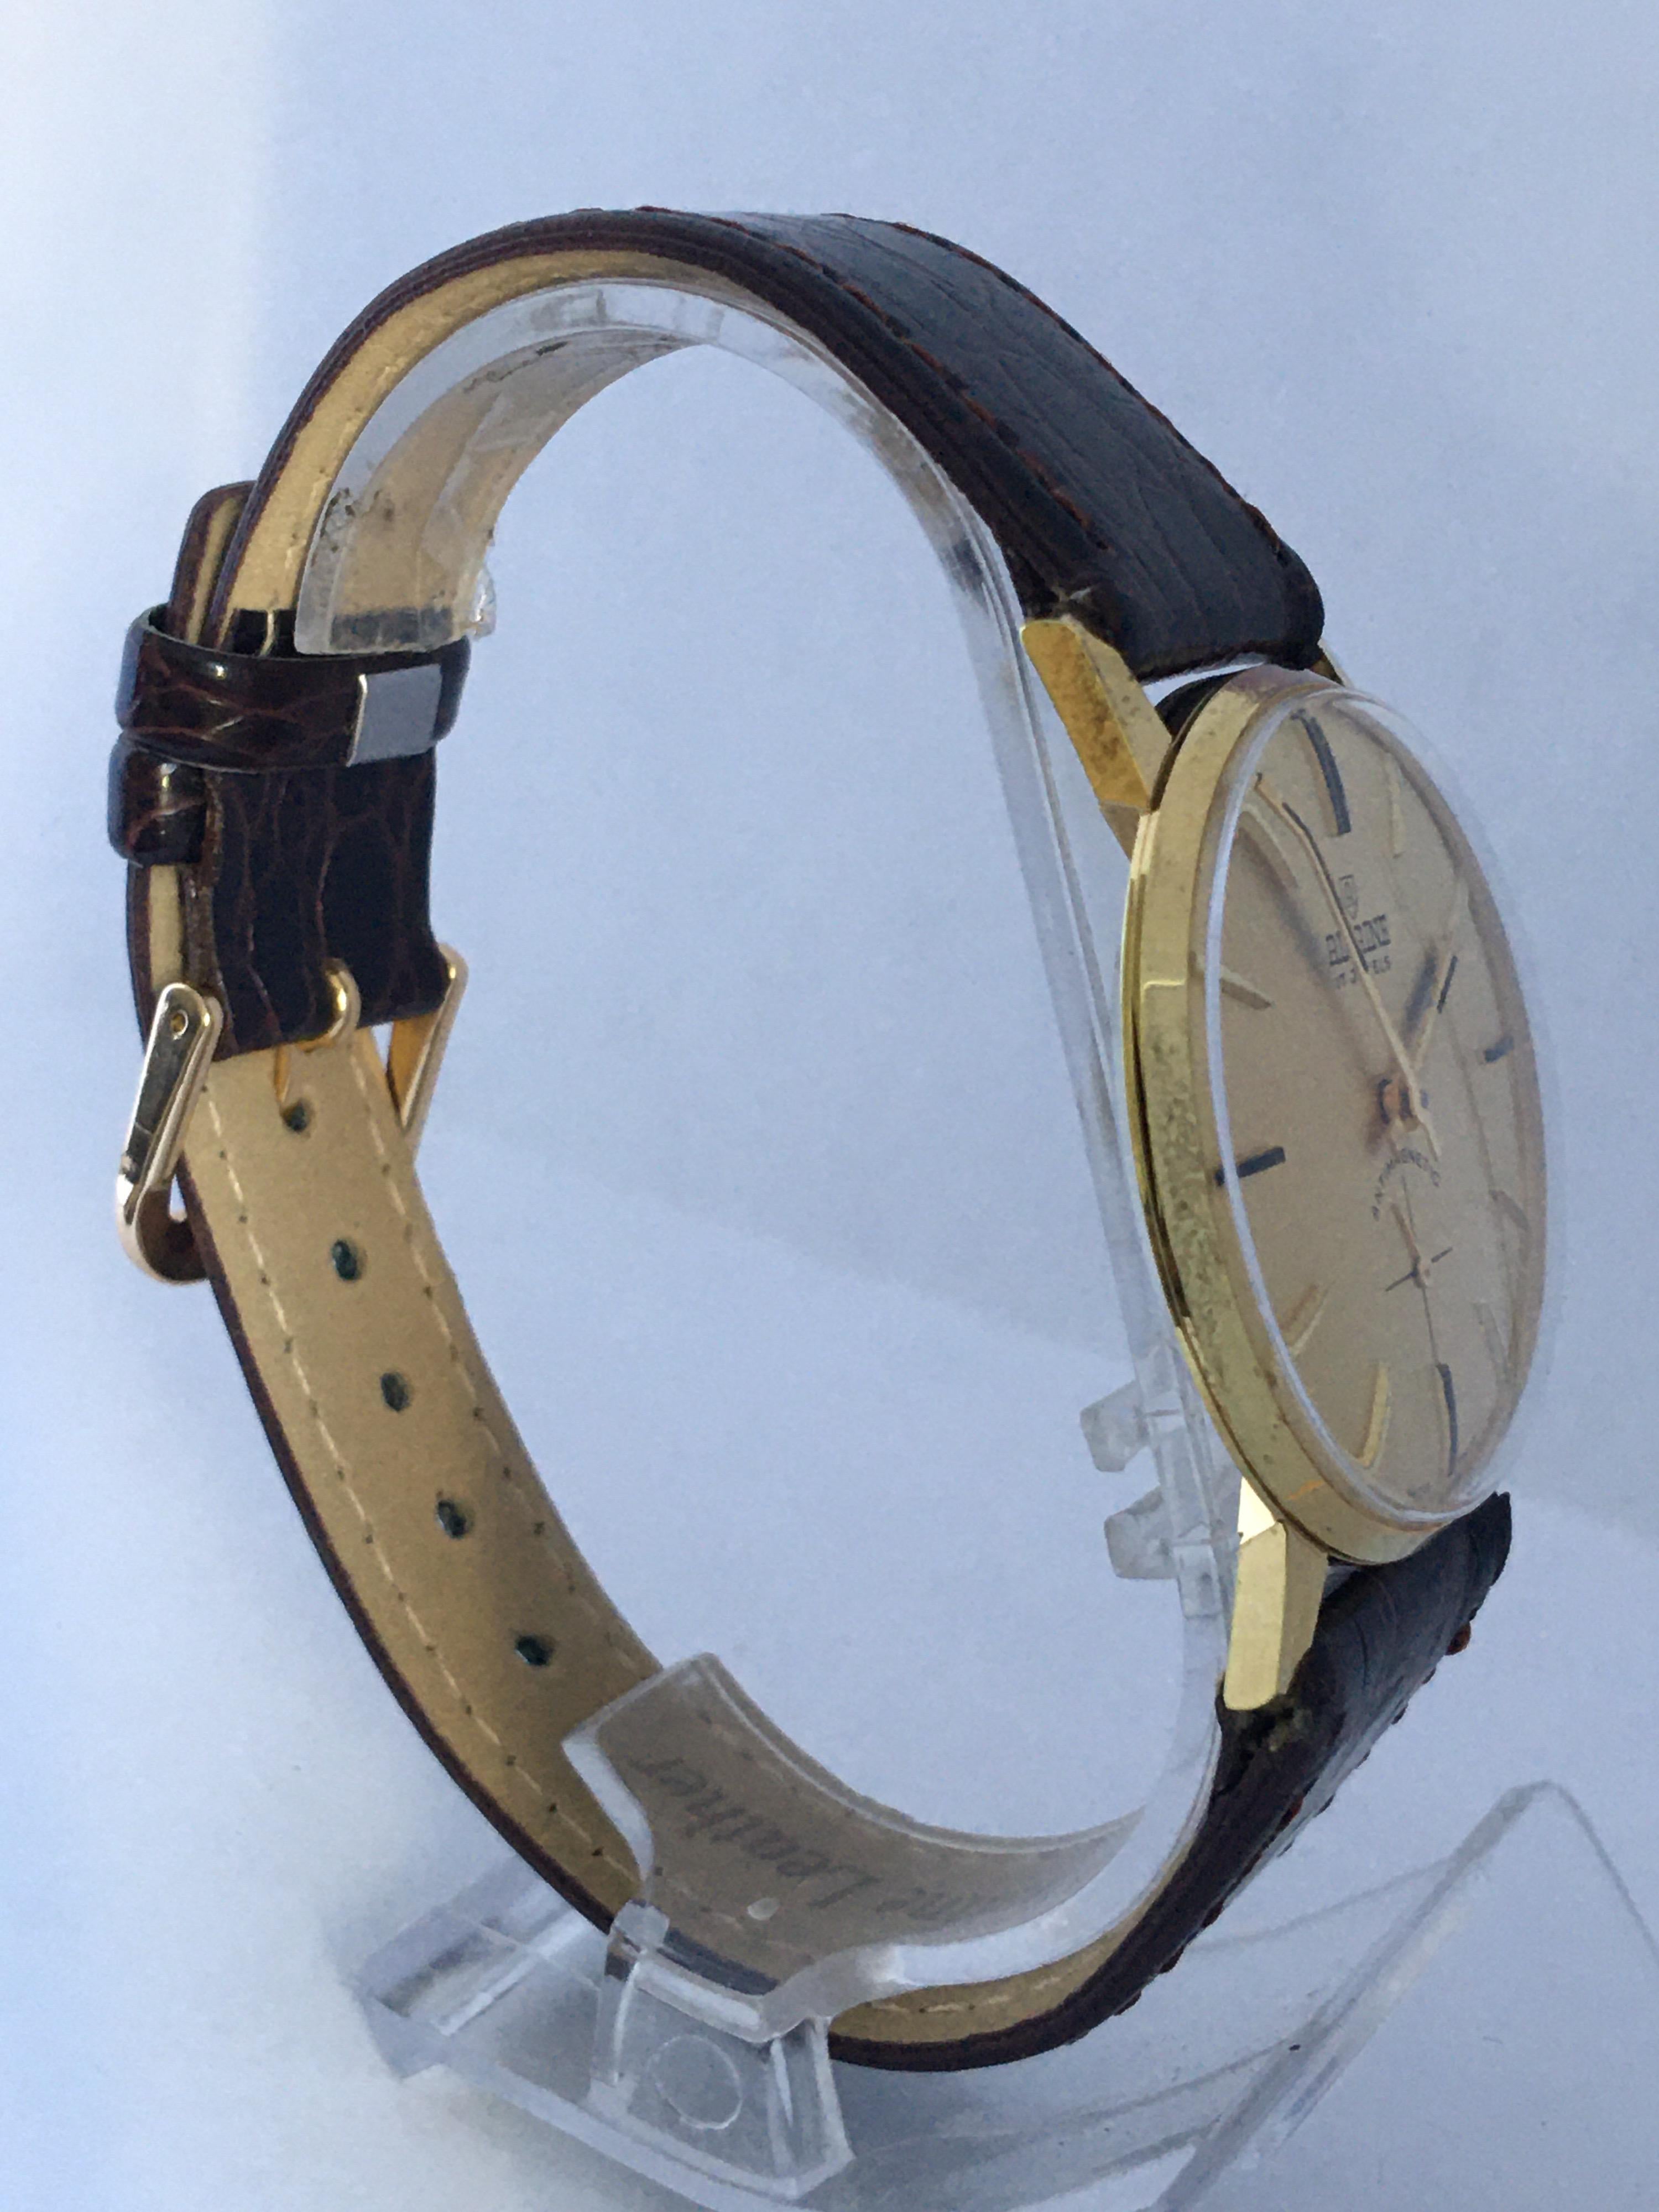 This beautiful pre-owned hand winding Swiss movement watch is working and it is running well. Some tarnished on the back case as shown. 

Please study the images carefully as form part of the description.